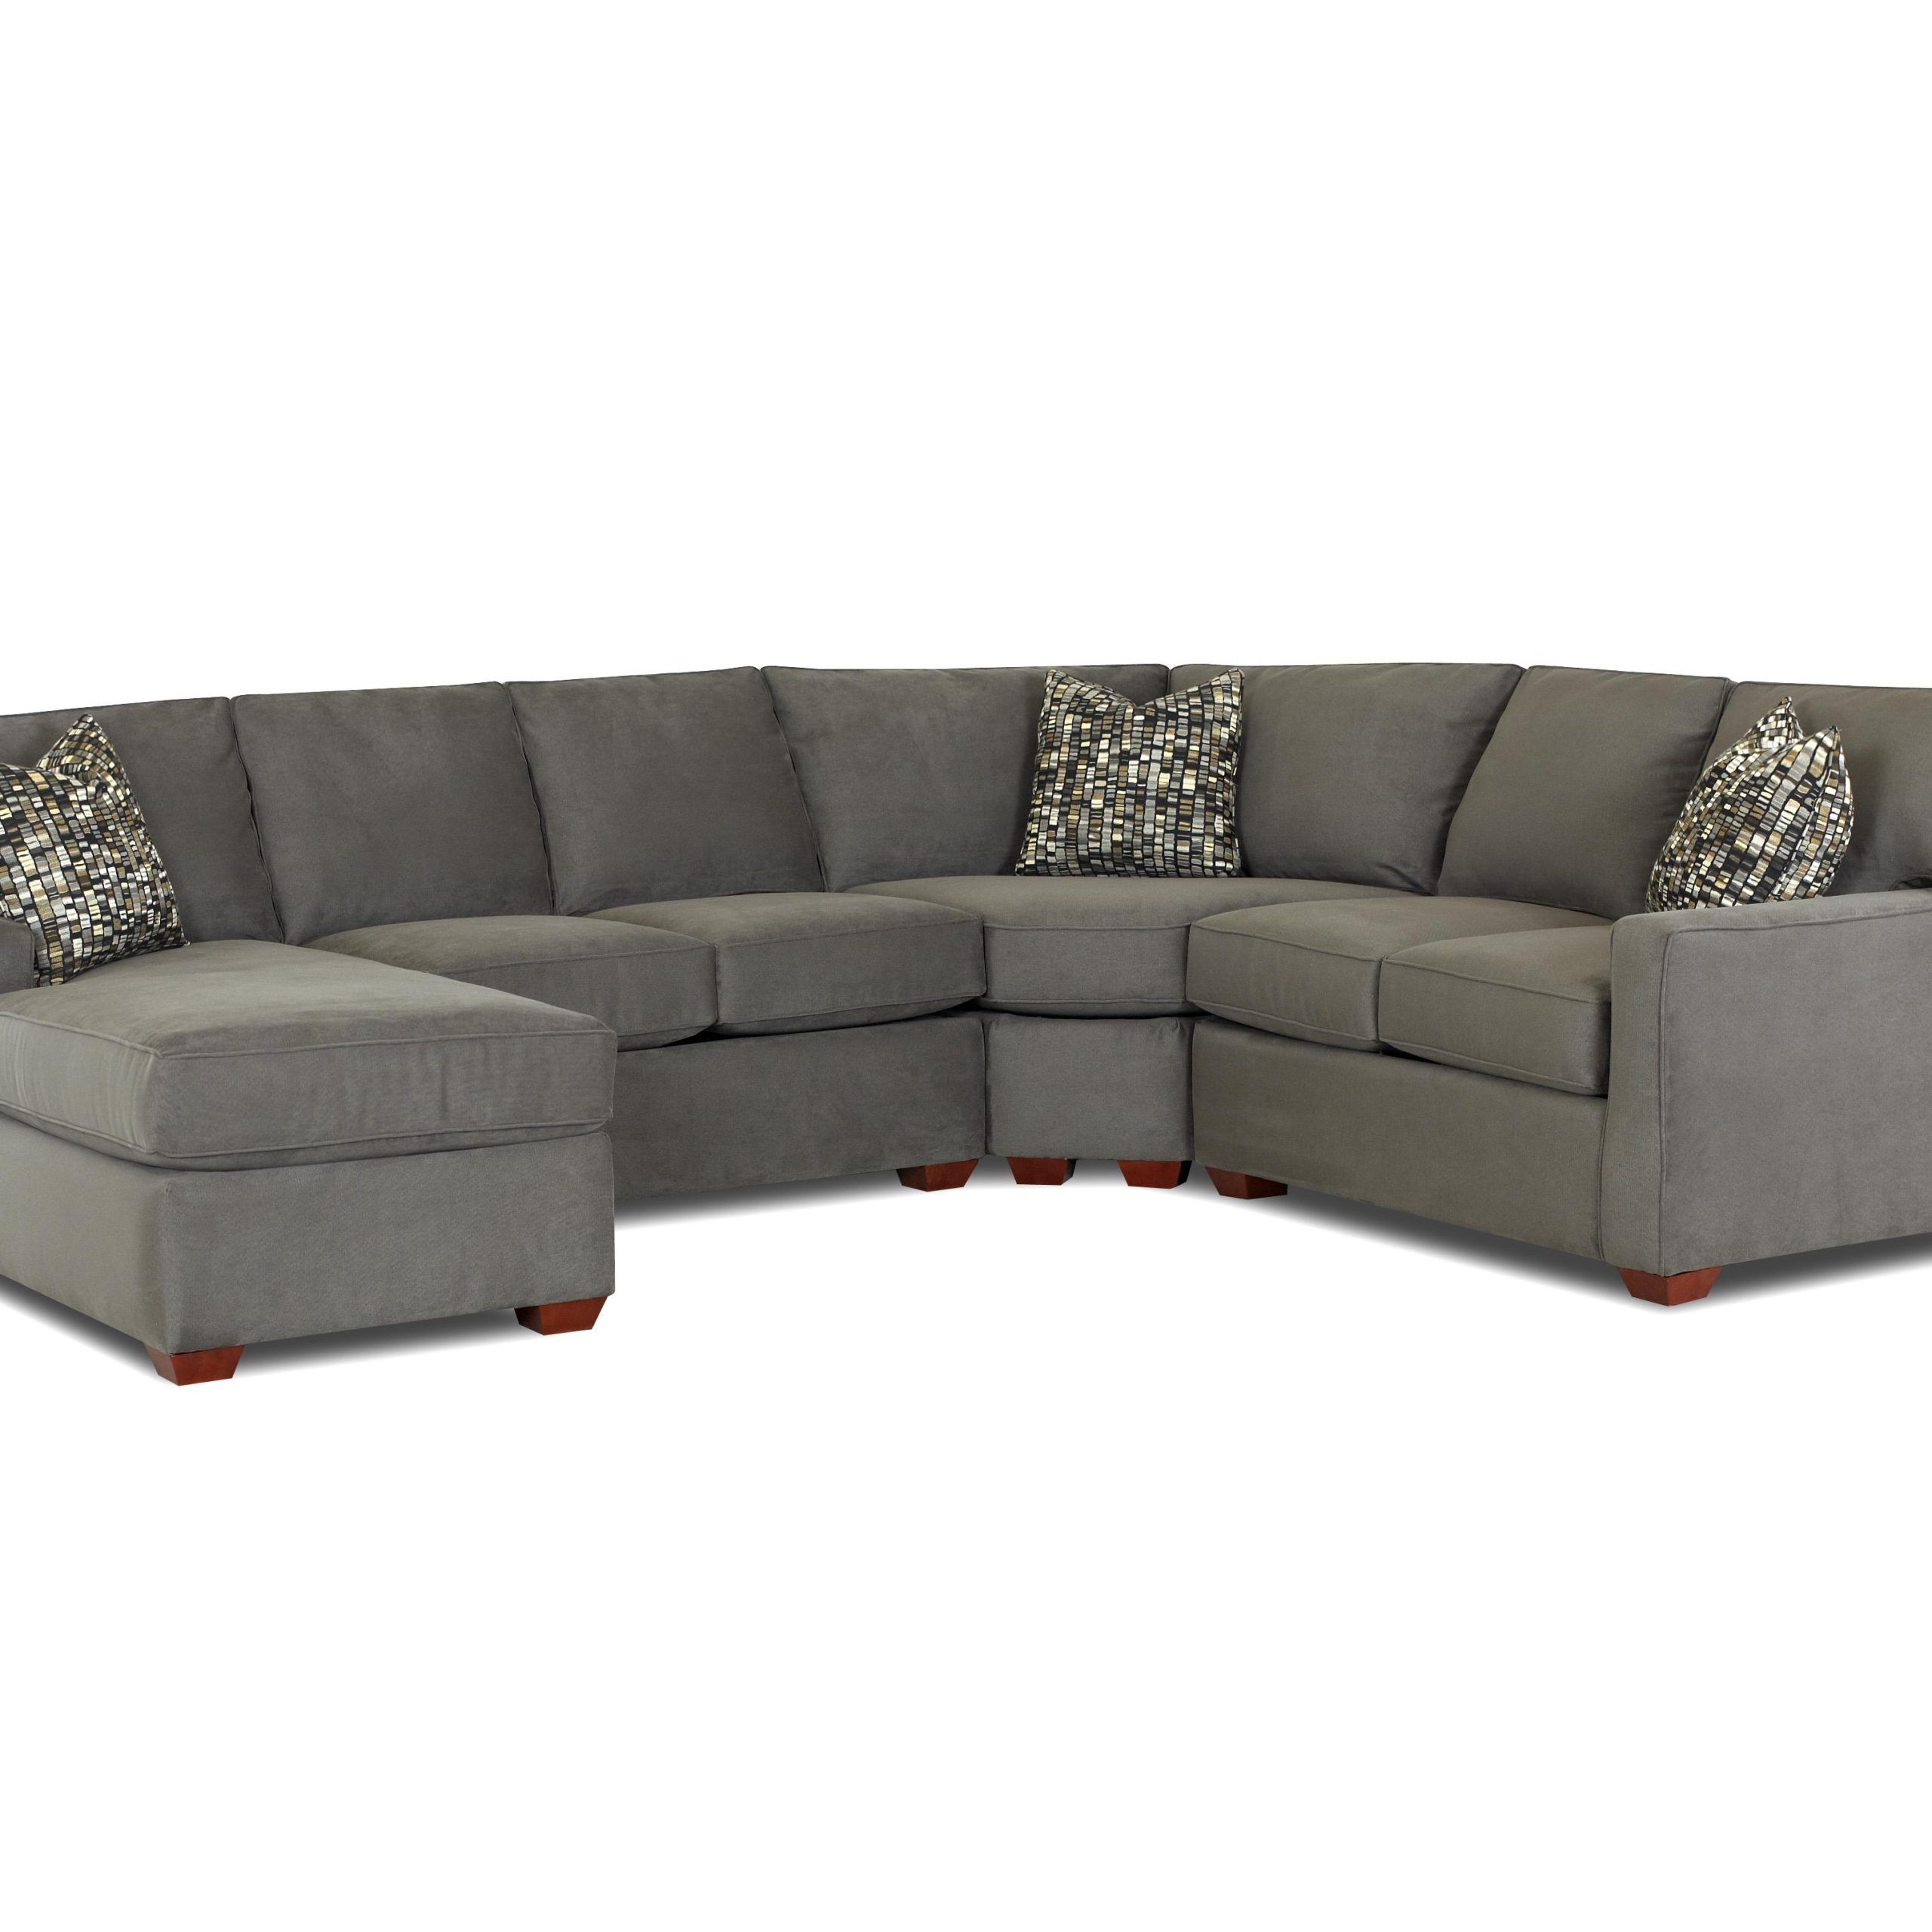 Contemporary L Shaped Sectional Sofa With Right Arm Facing Chaise Inside Modern L Shaped Sofa Sectionals (View 2 of 20)